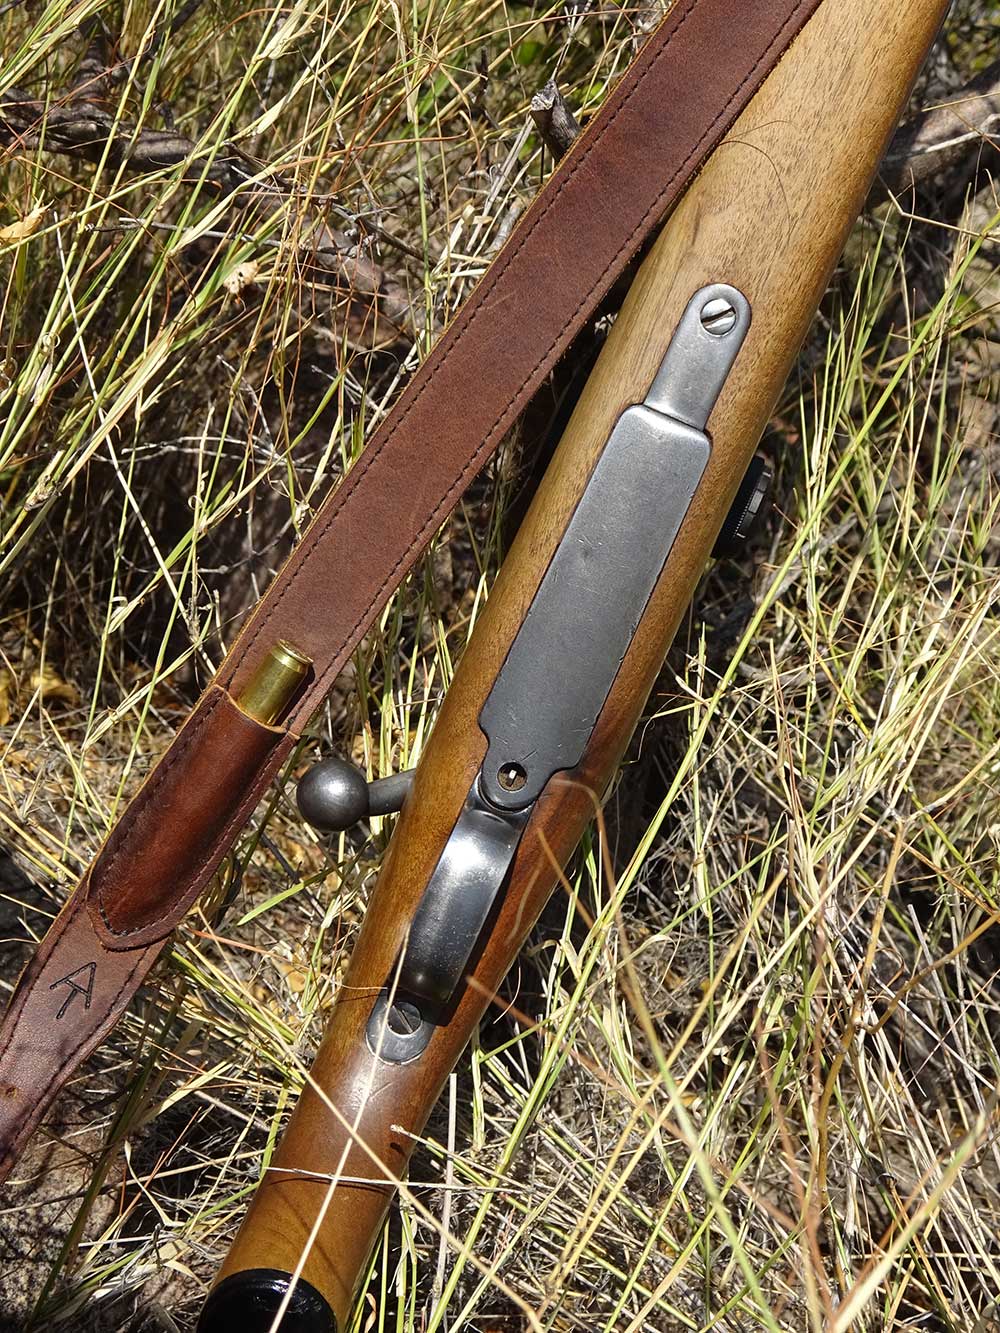 rifle and sling